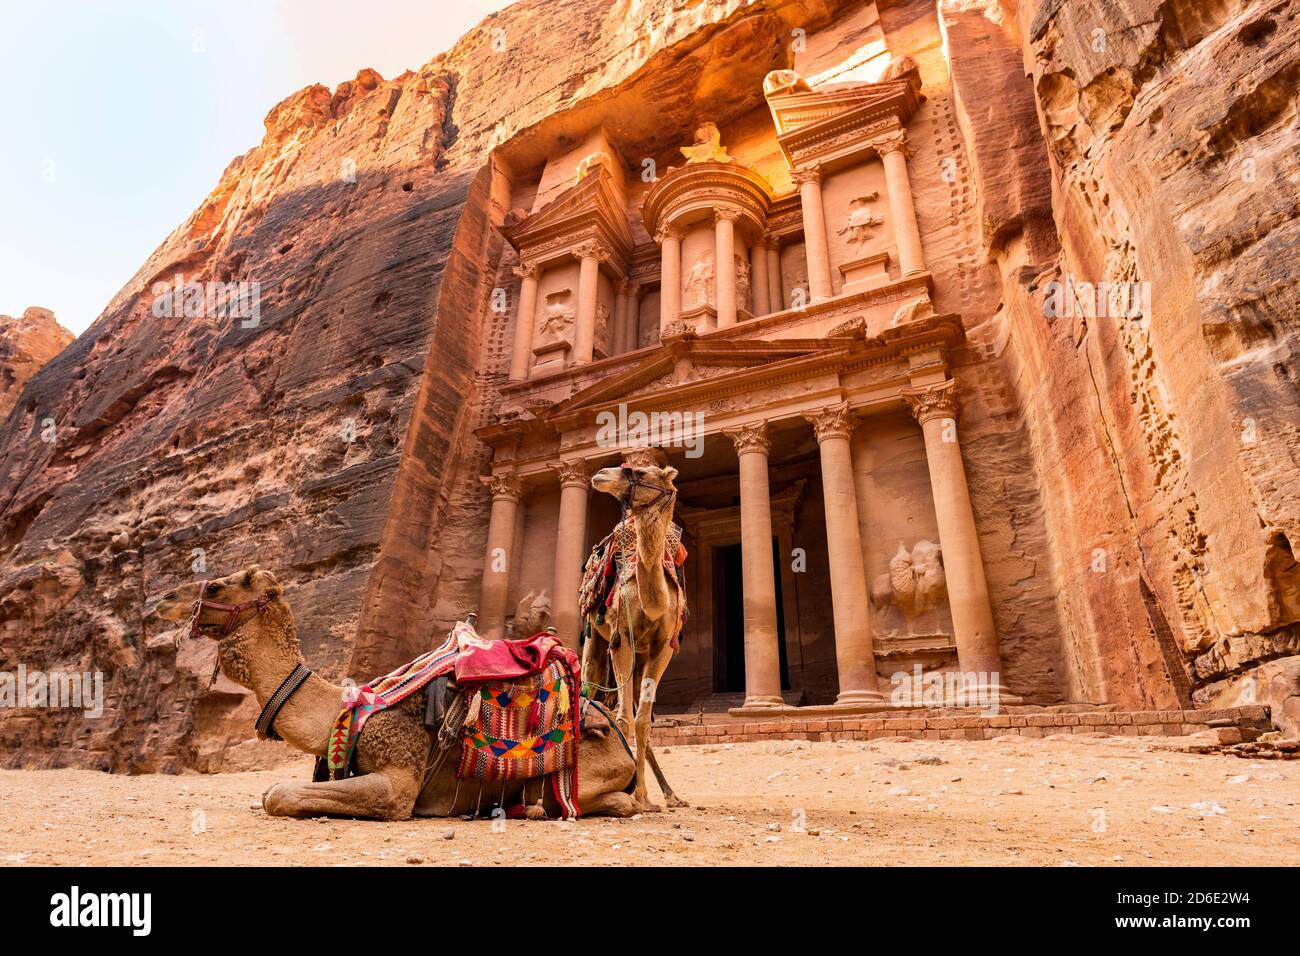 Stunning view of two camels posing in front of the Al Khazneh (The Treasury) in Petra. Al-Khazneh is one of the most elaborate temples in Petra. Stock Photo